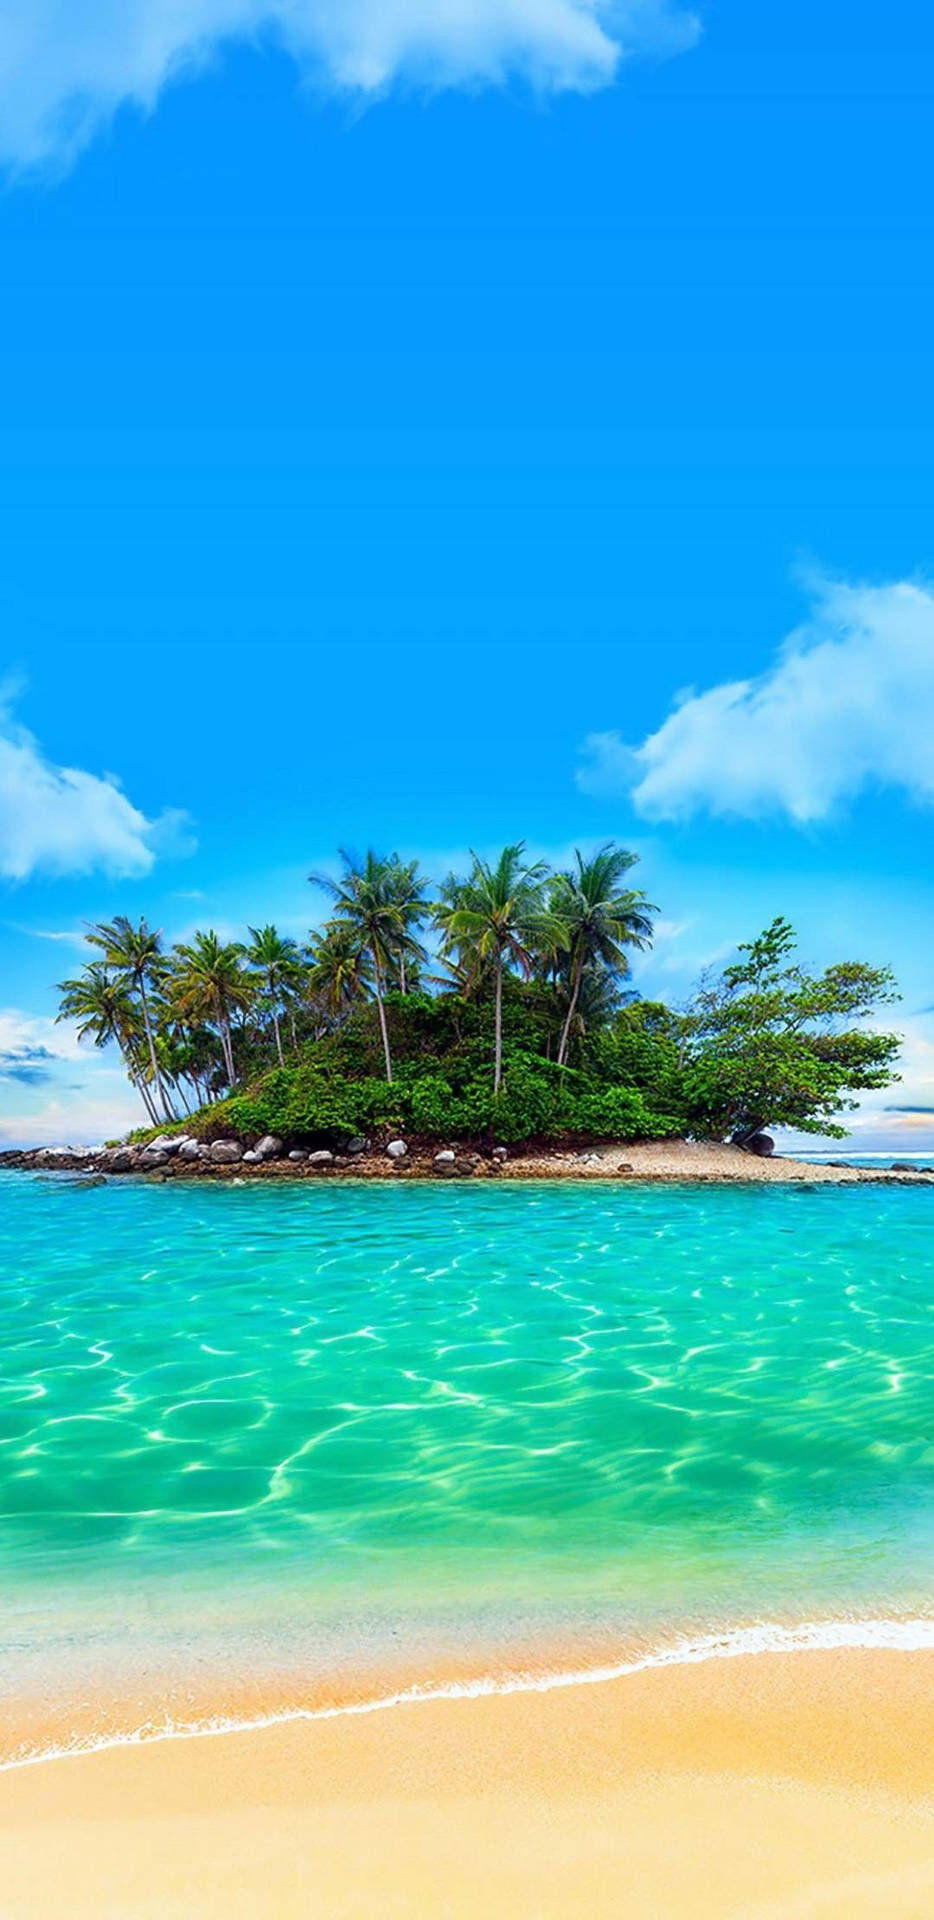 Secluded Island Wallpaper